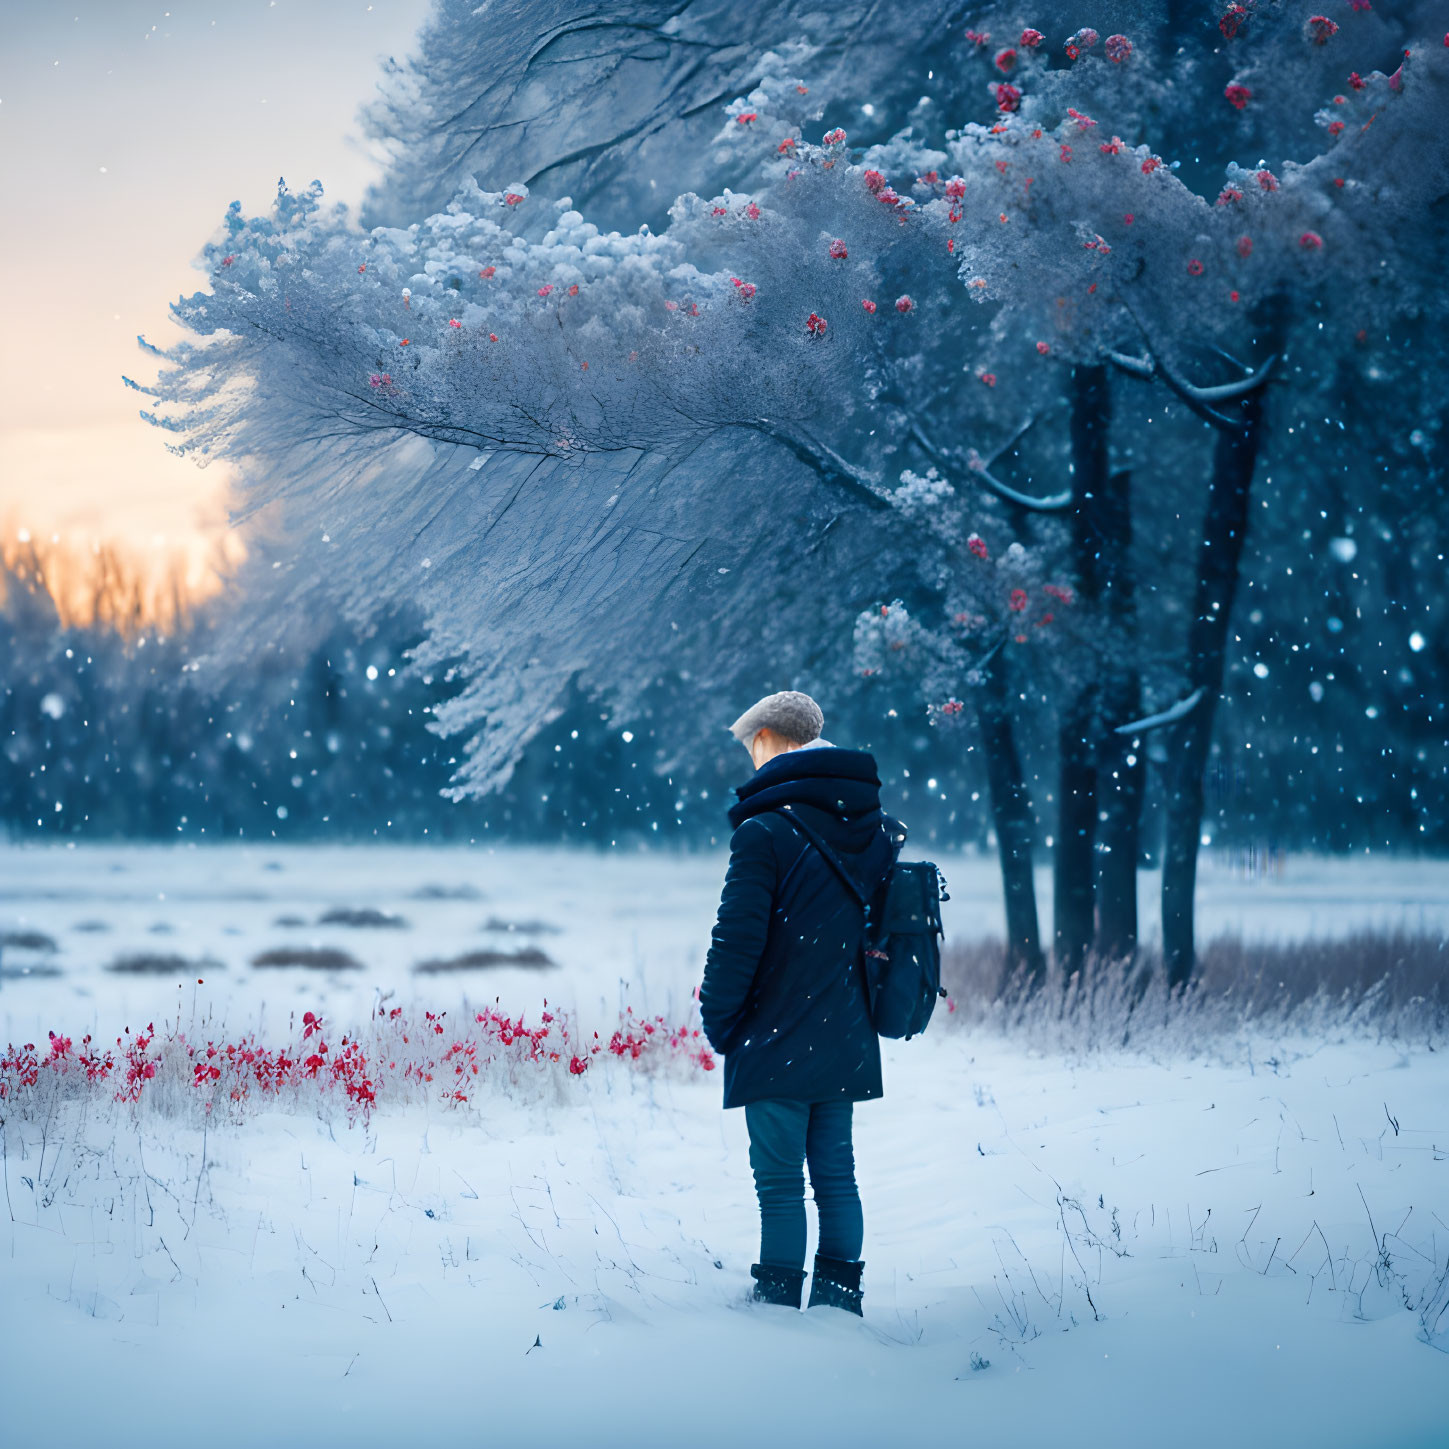 Person in Winter Clothing Surrounded by Snowy Landscape and Red Berries